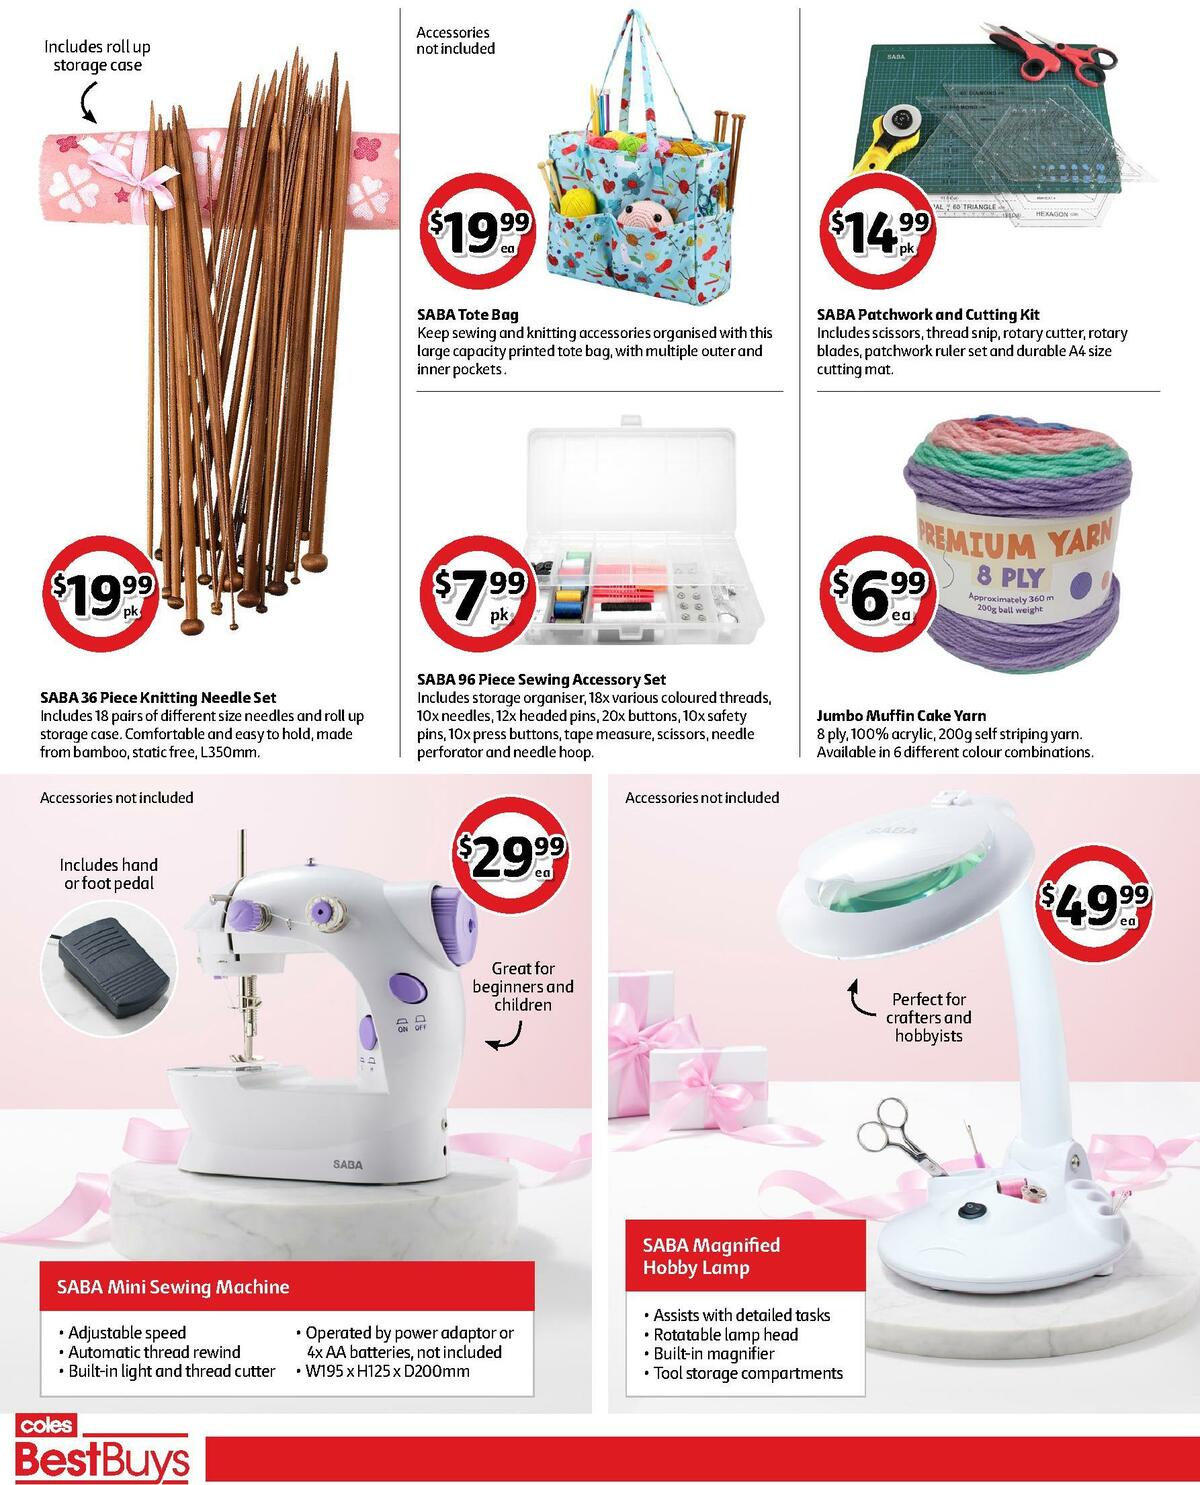 Coles Best Buys - Mother's Day Catalogues from 22 April